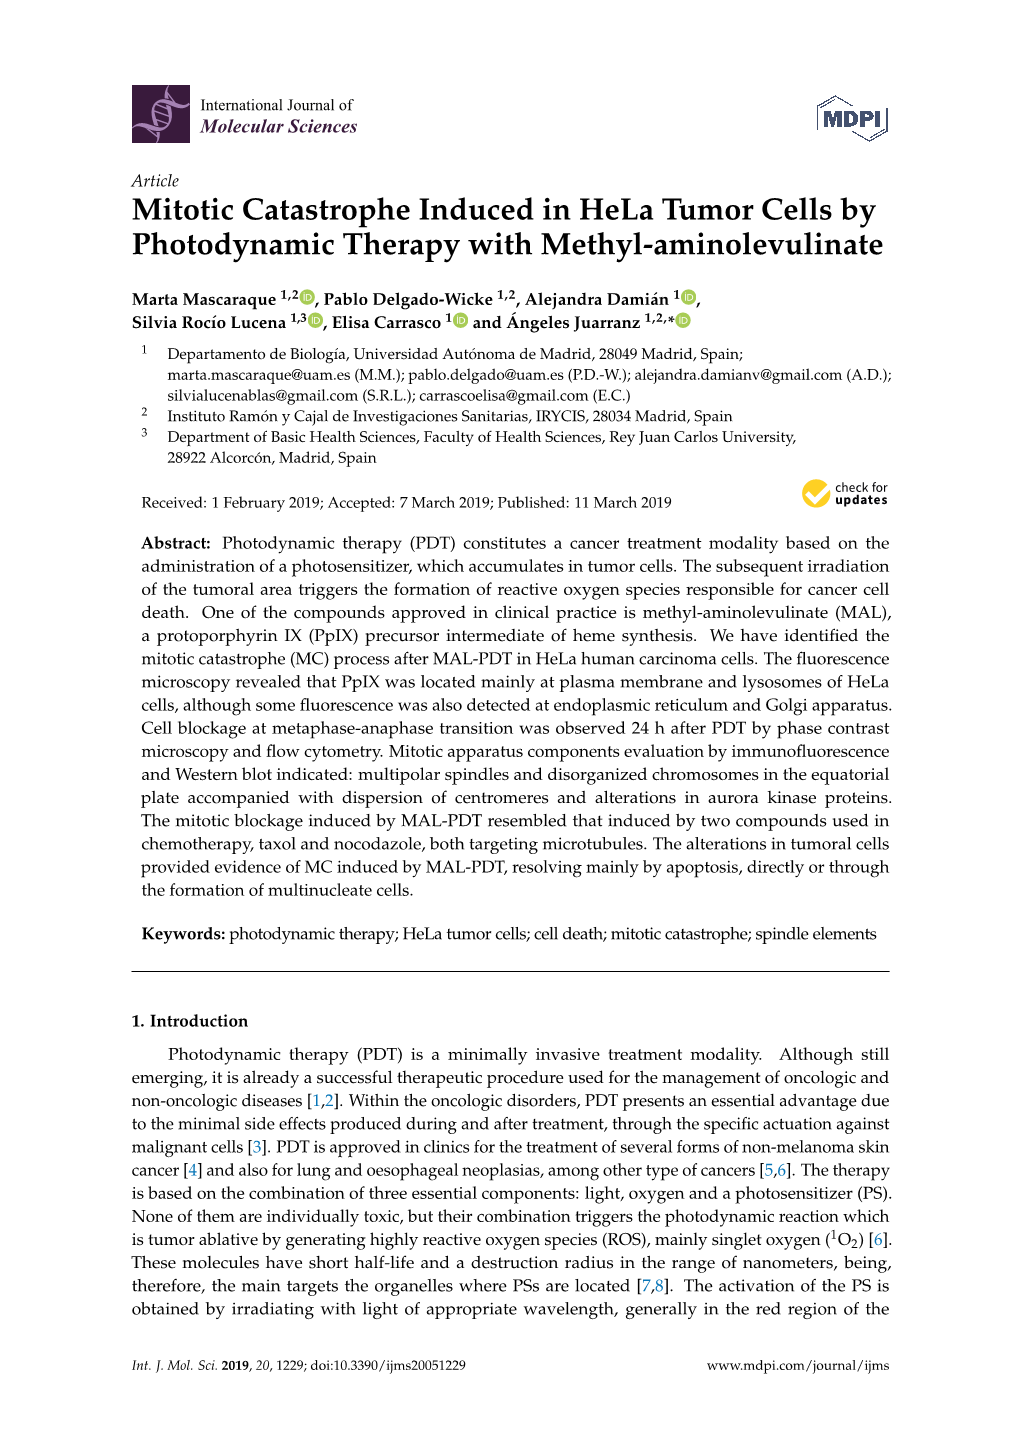 Mitotic Catastrophe Induced in Hela Tumor Cells by Photodynamic Therapy with Methyl-Aminolevulinate